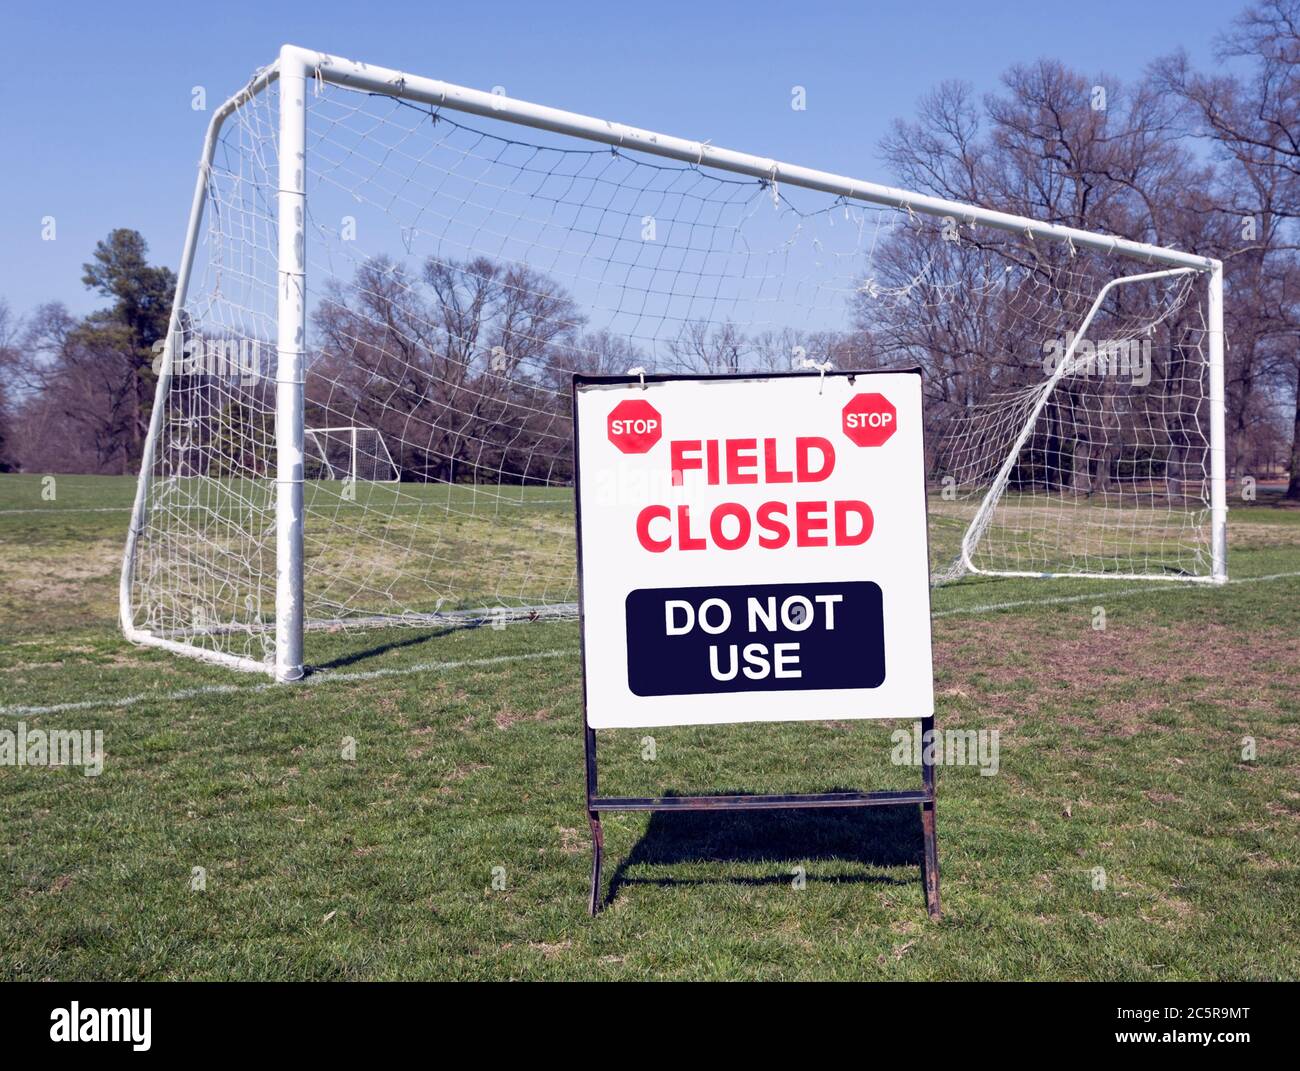 Soccer field closed sign with soccer net in background. Horizontal. Stock Photo